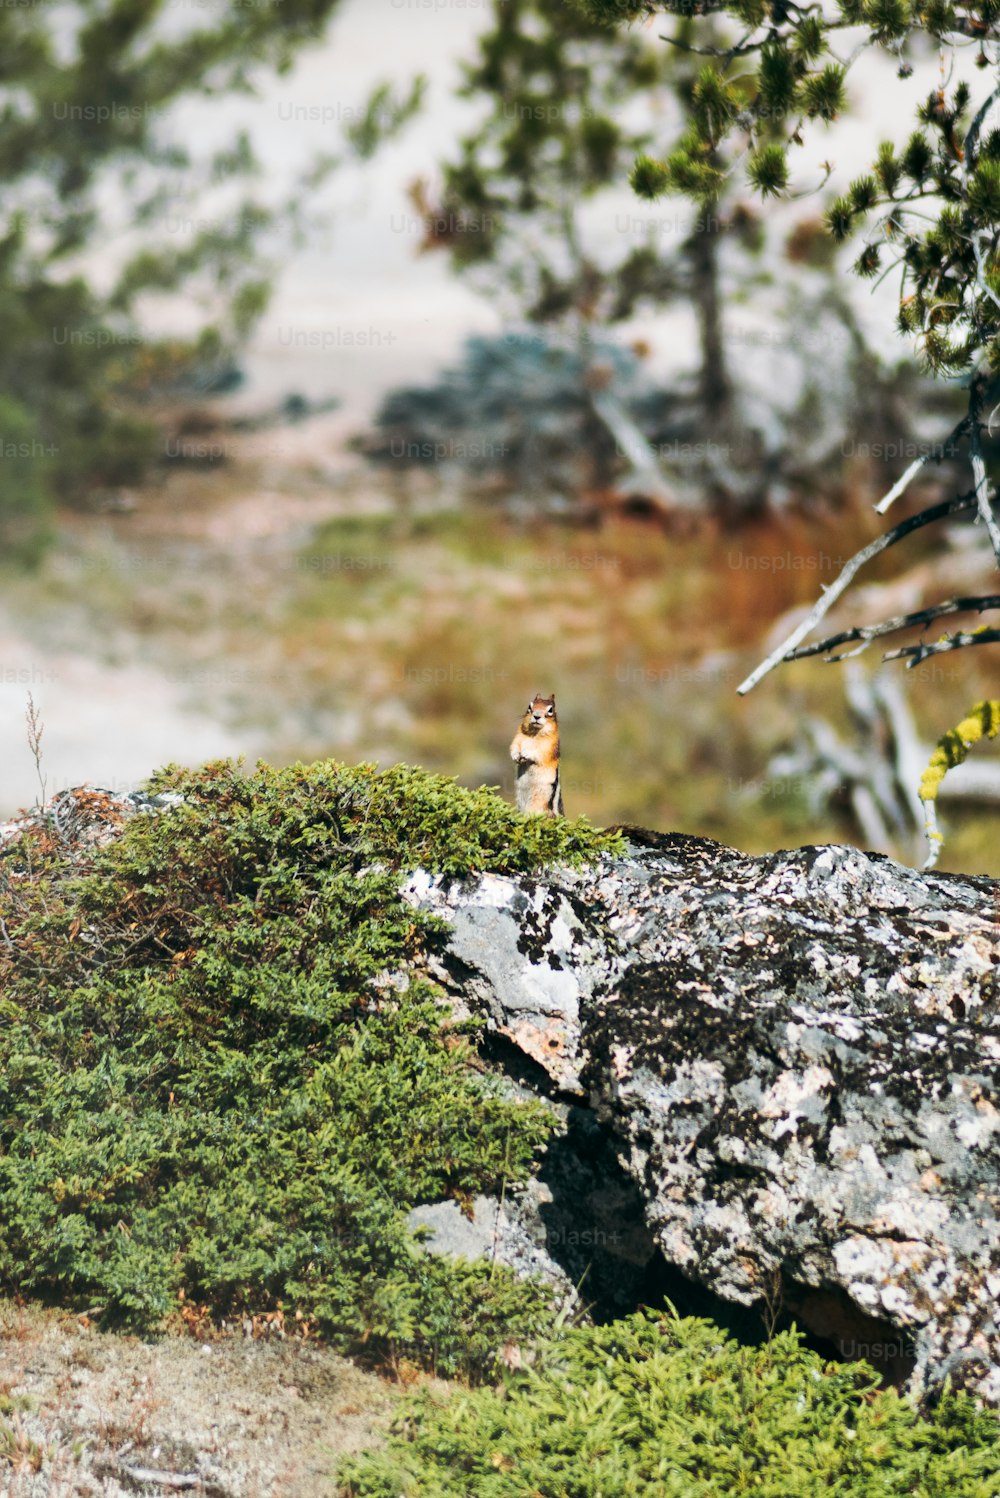 a small bird sitting on top of a moss covered rock